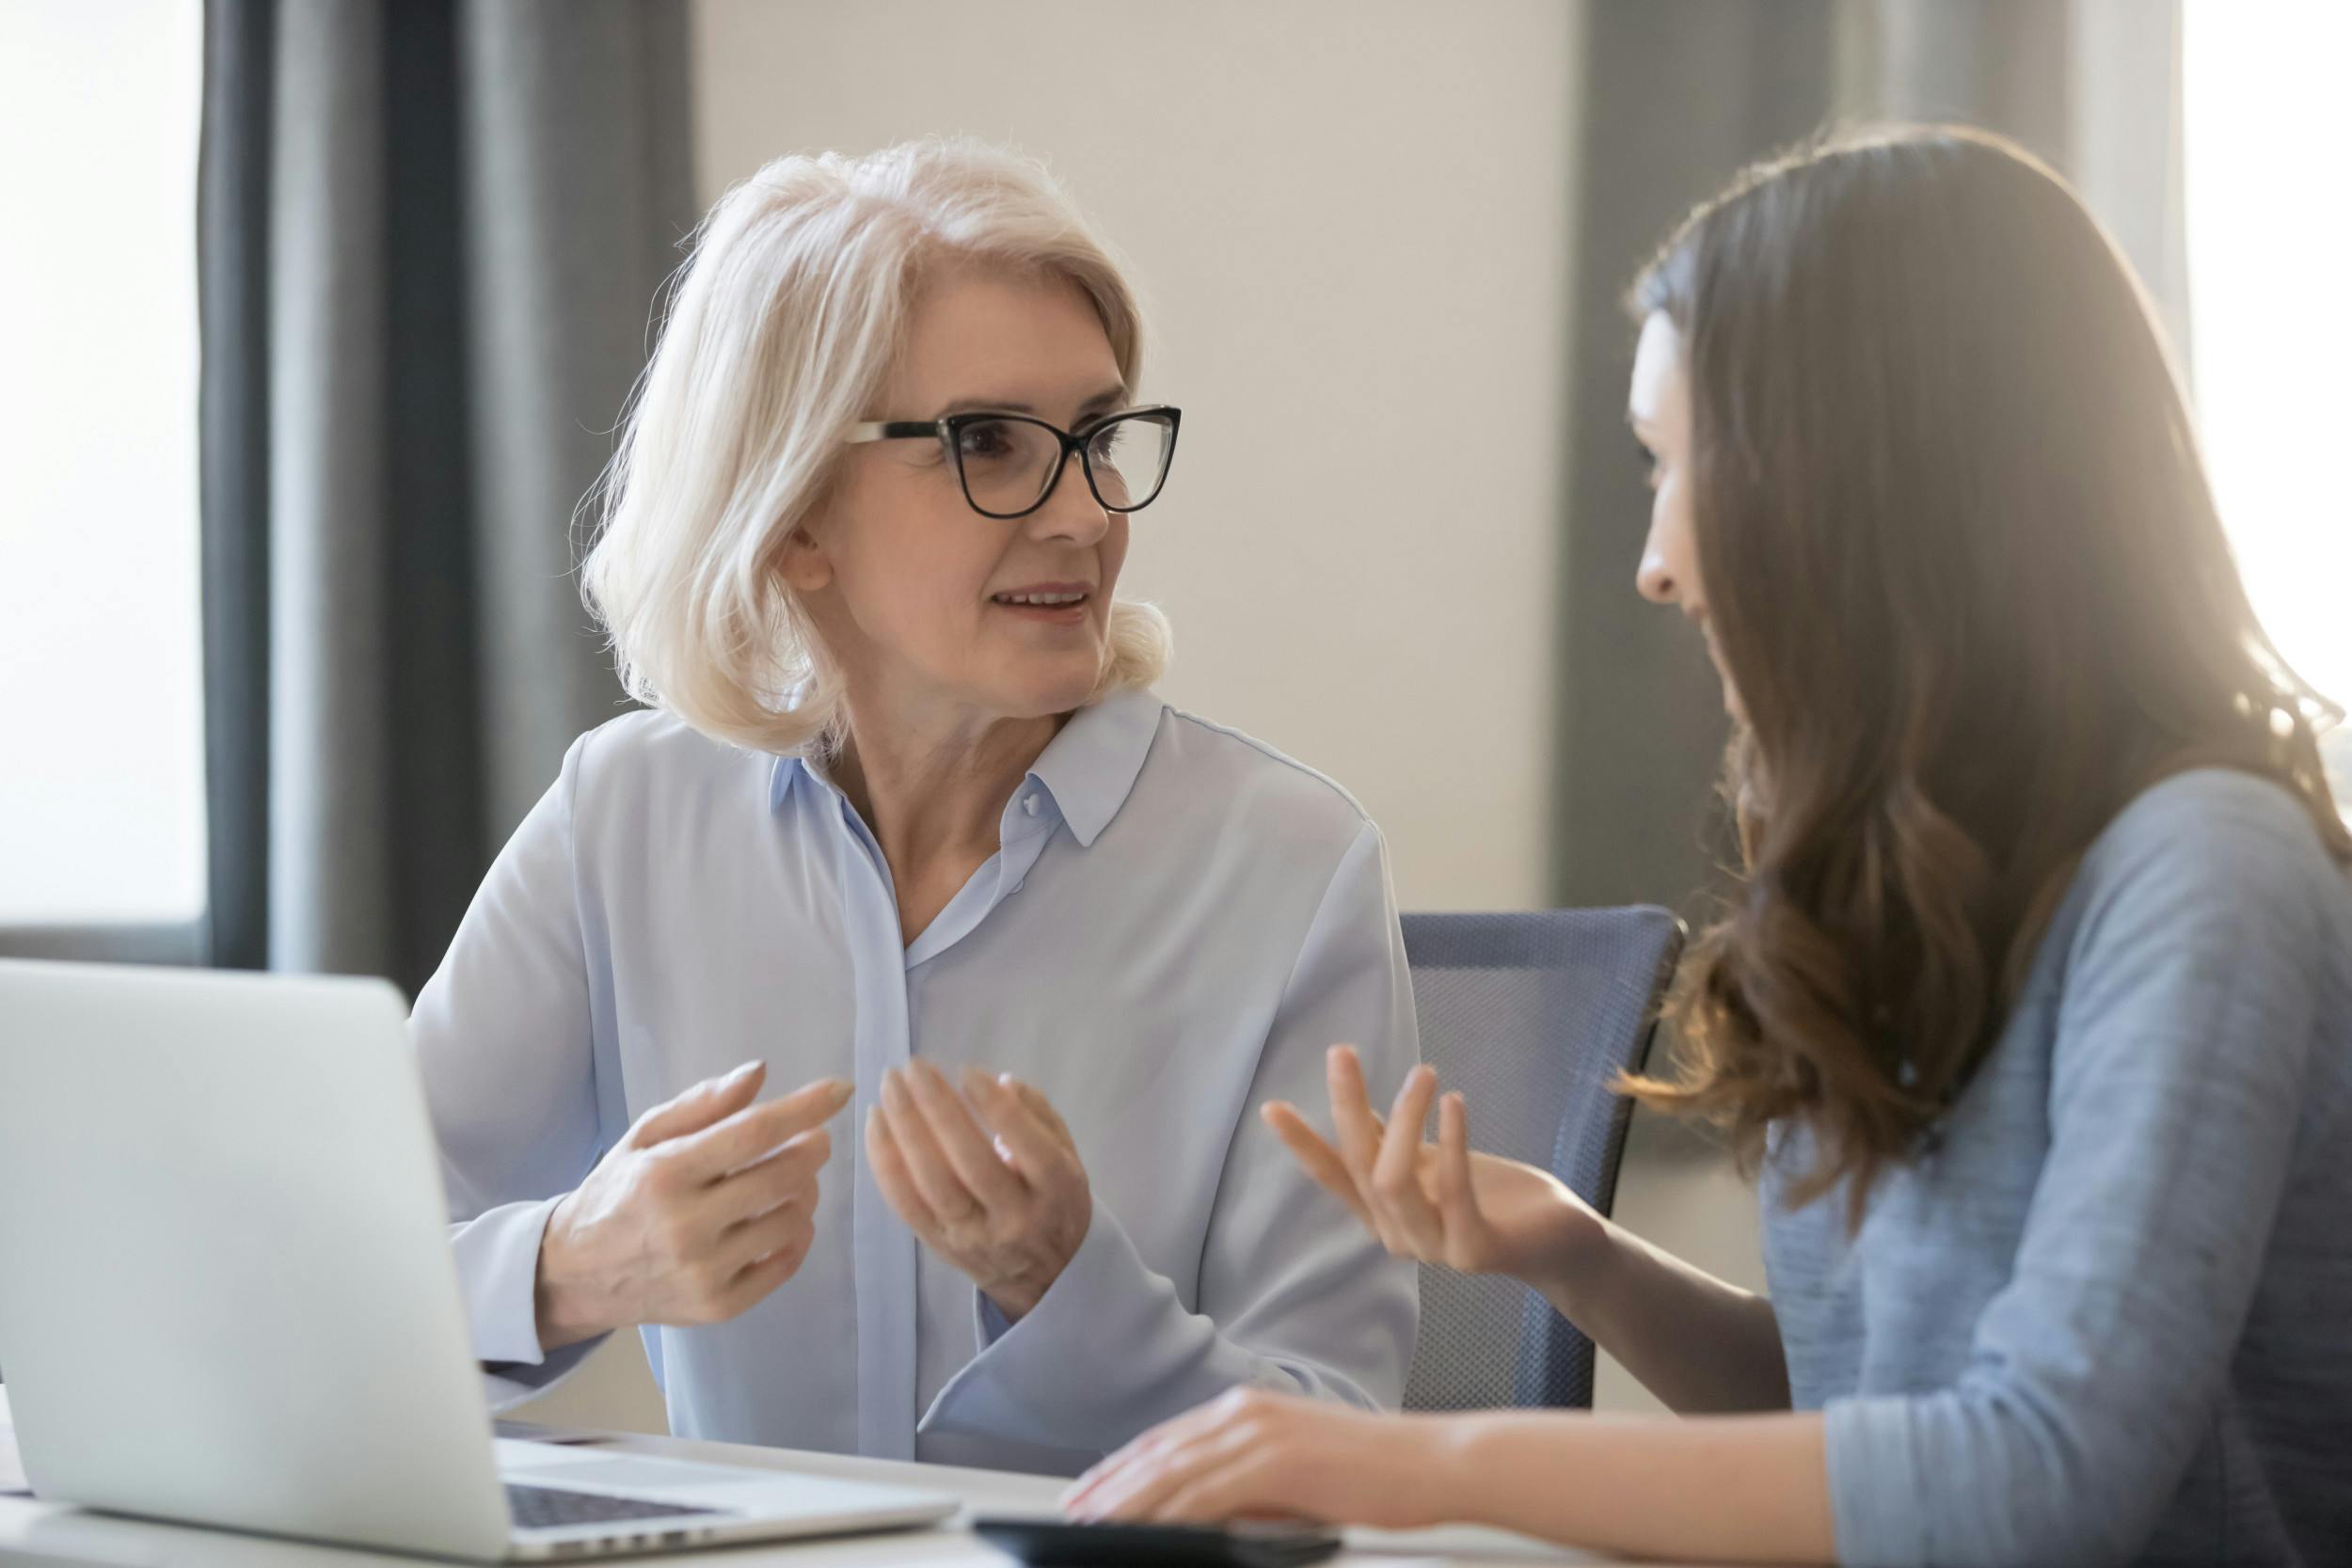 15 Ways to Empower Women to Apply for Leadership Roles